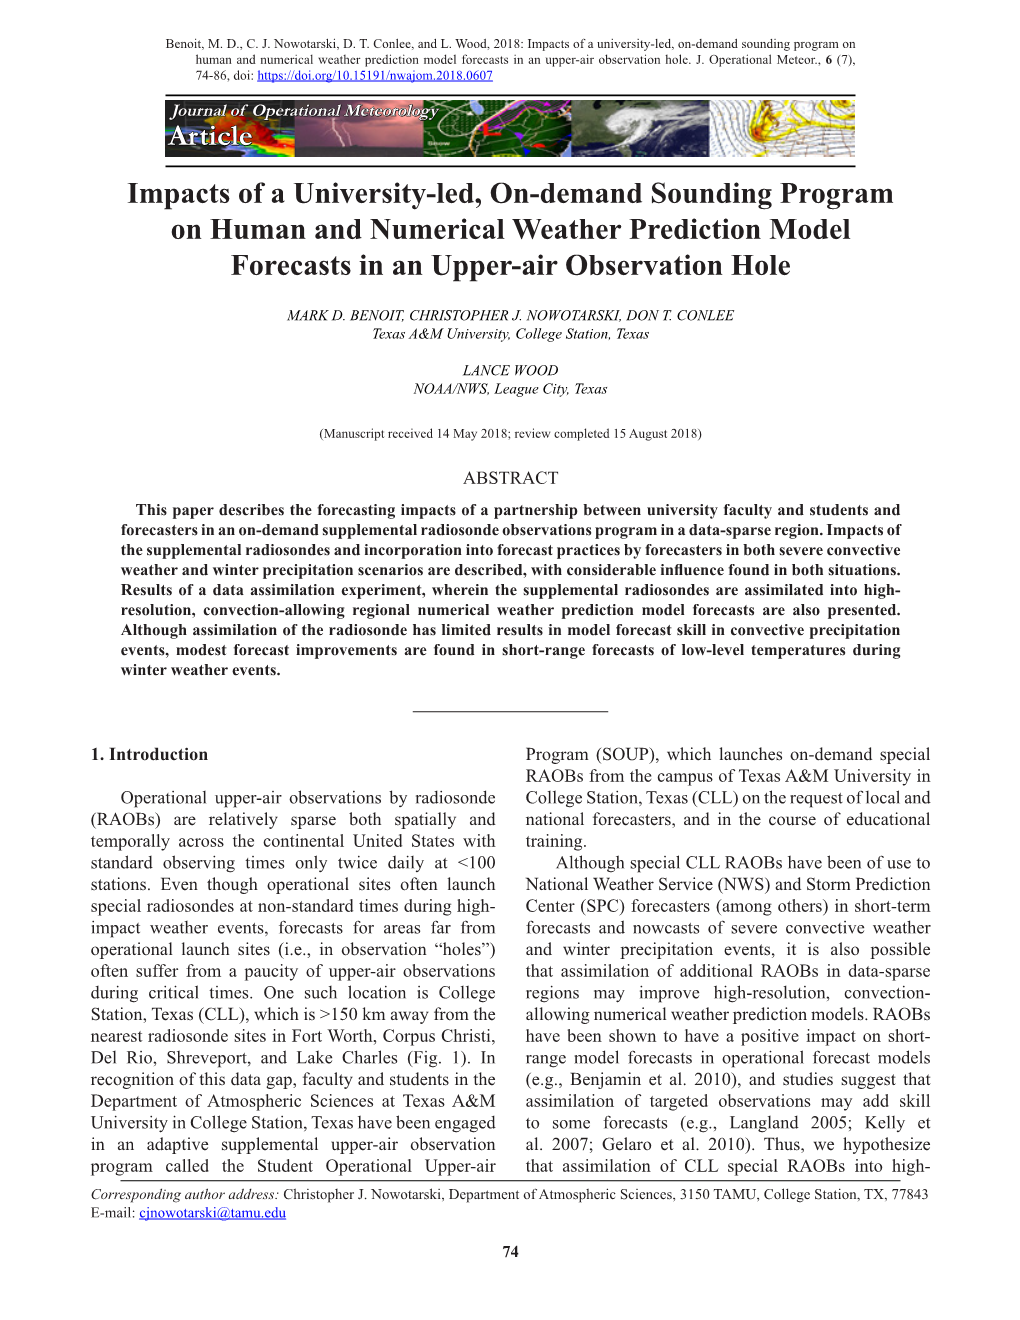 Impacts of a University-Led, On-Demand Sounding Program on Human and Numerical Weather Prediction Model Forecasts in an Upper-Air Observation Hole